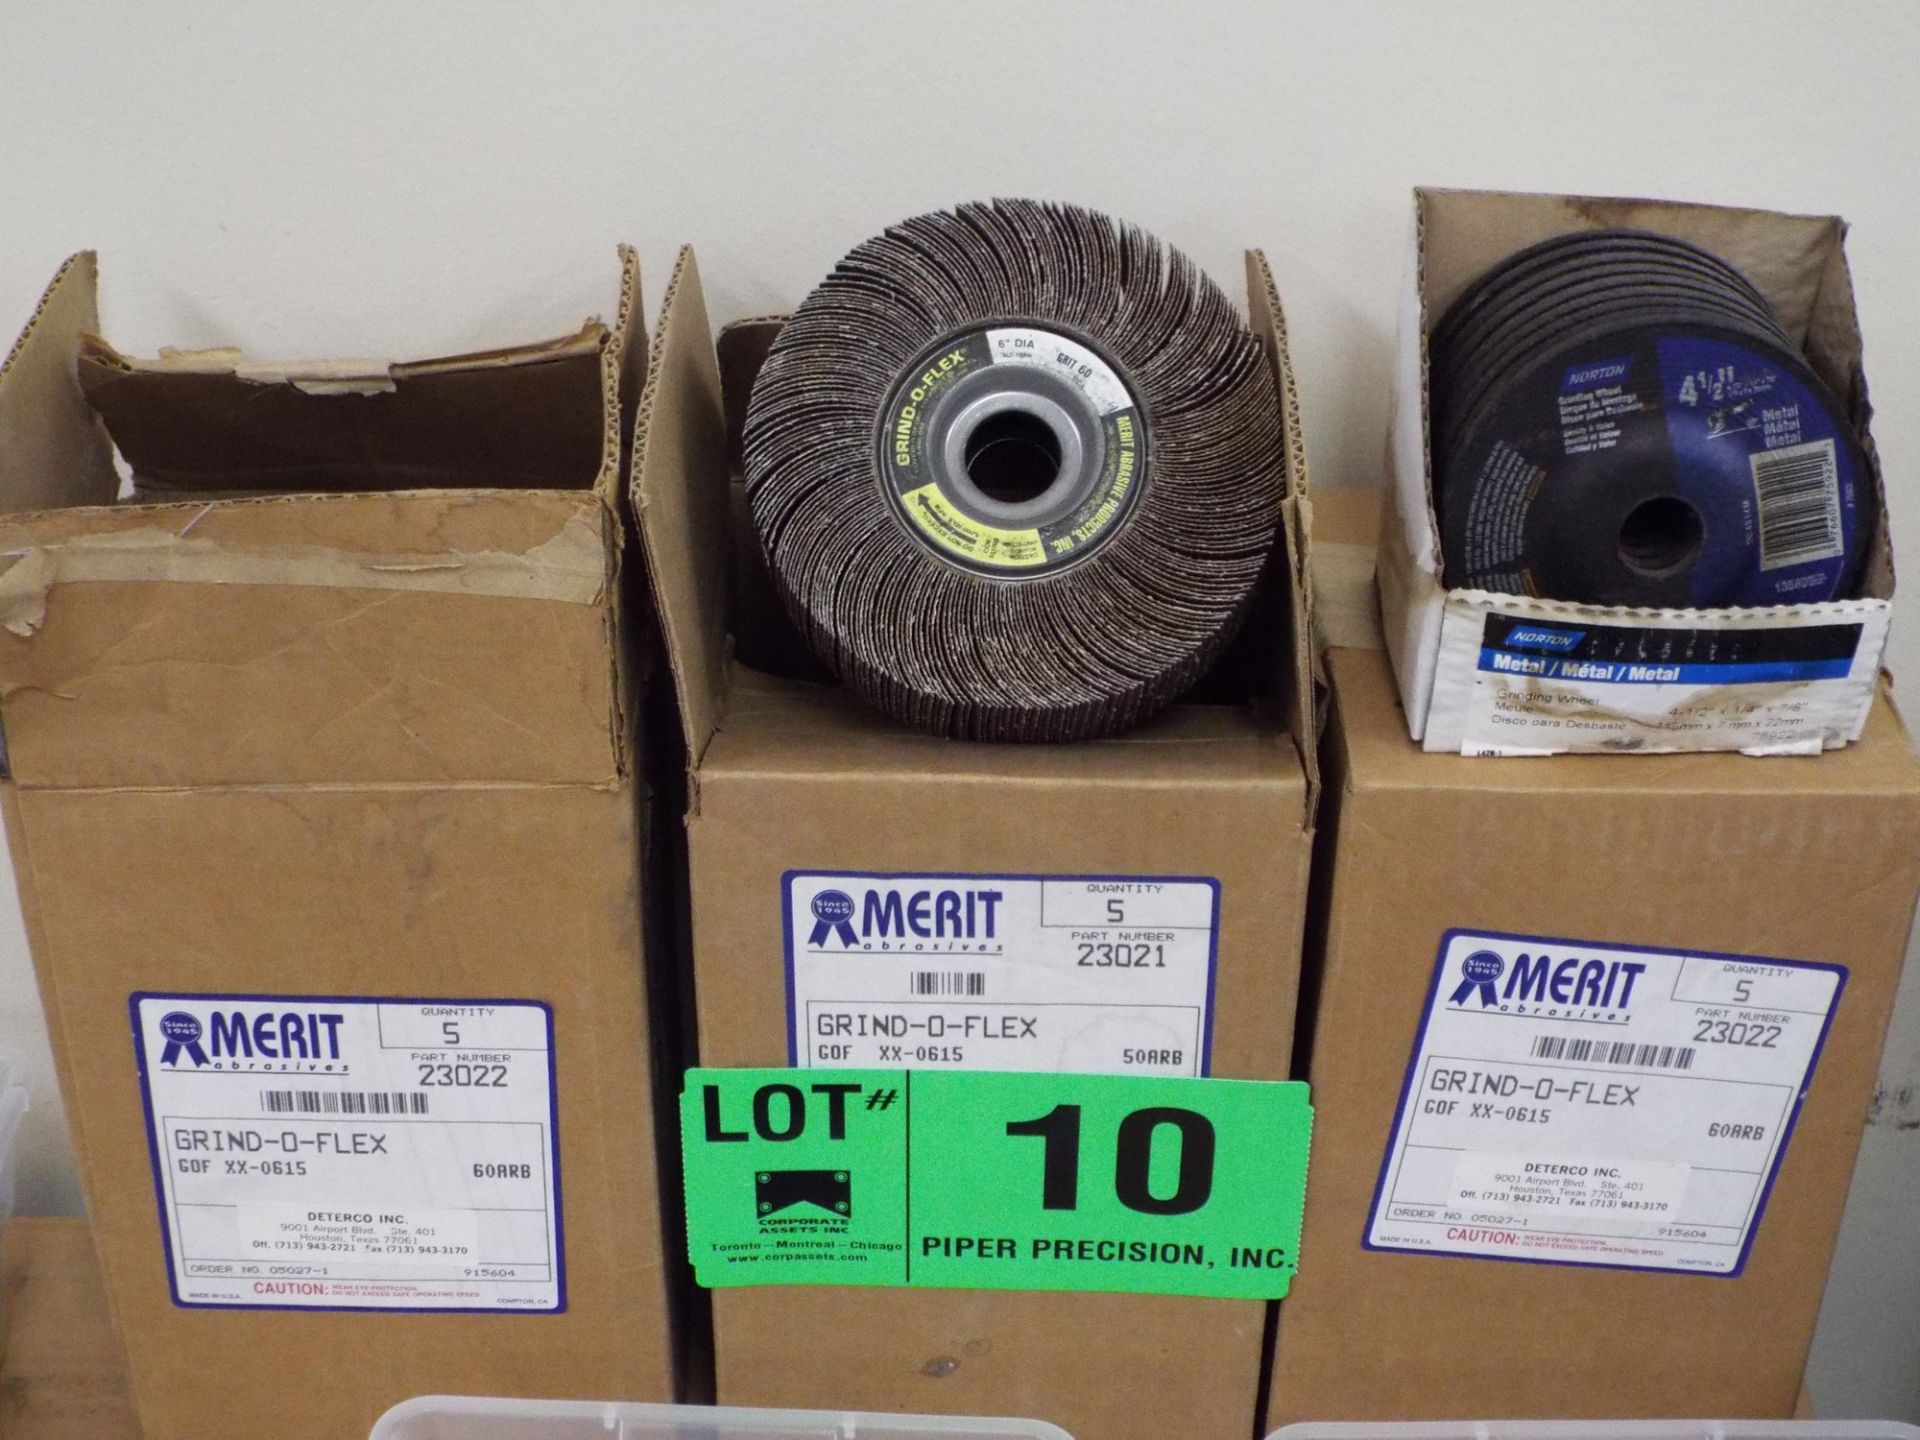 LOT/ 6" ABRASIVE WHEELS AND 4.5" GRINDING DISCS